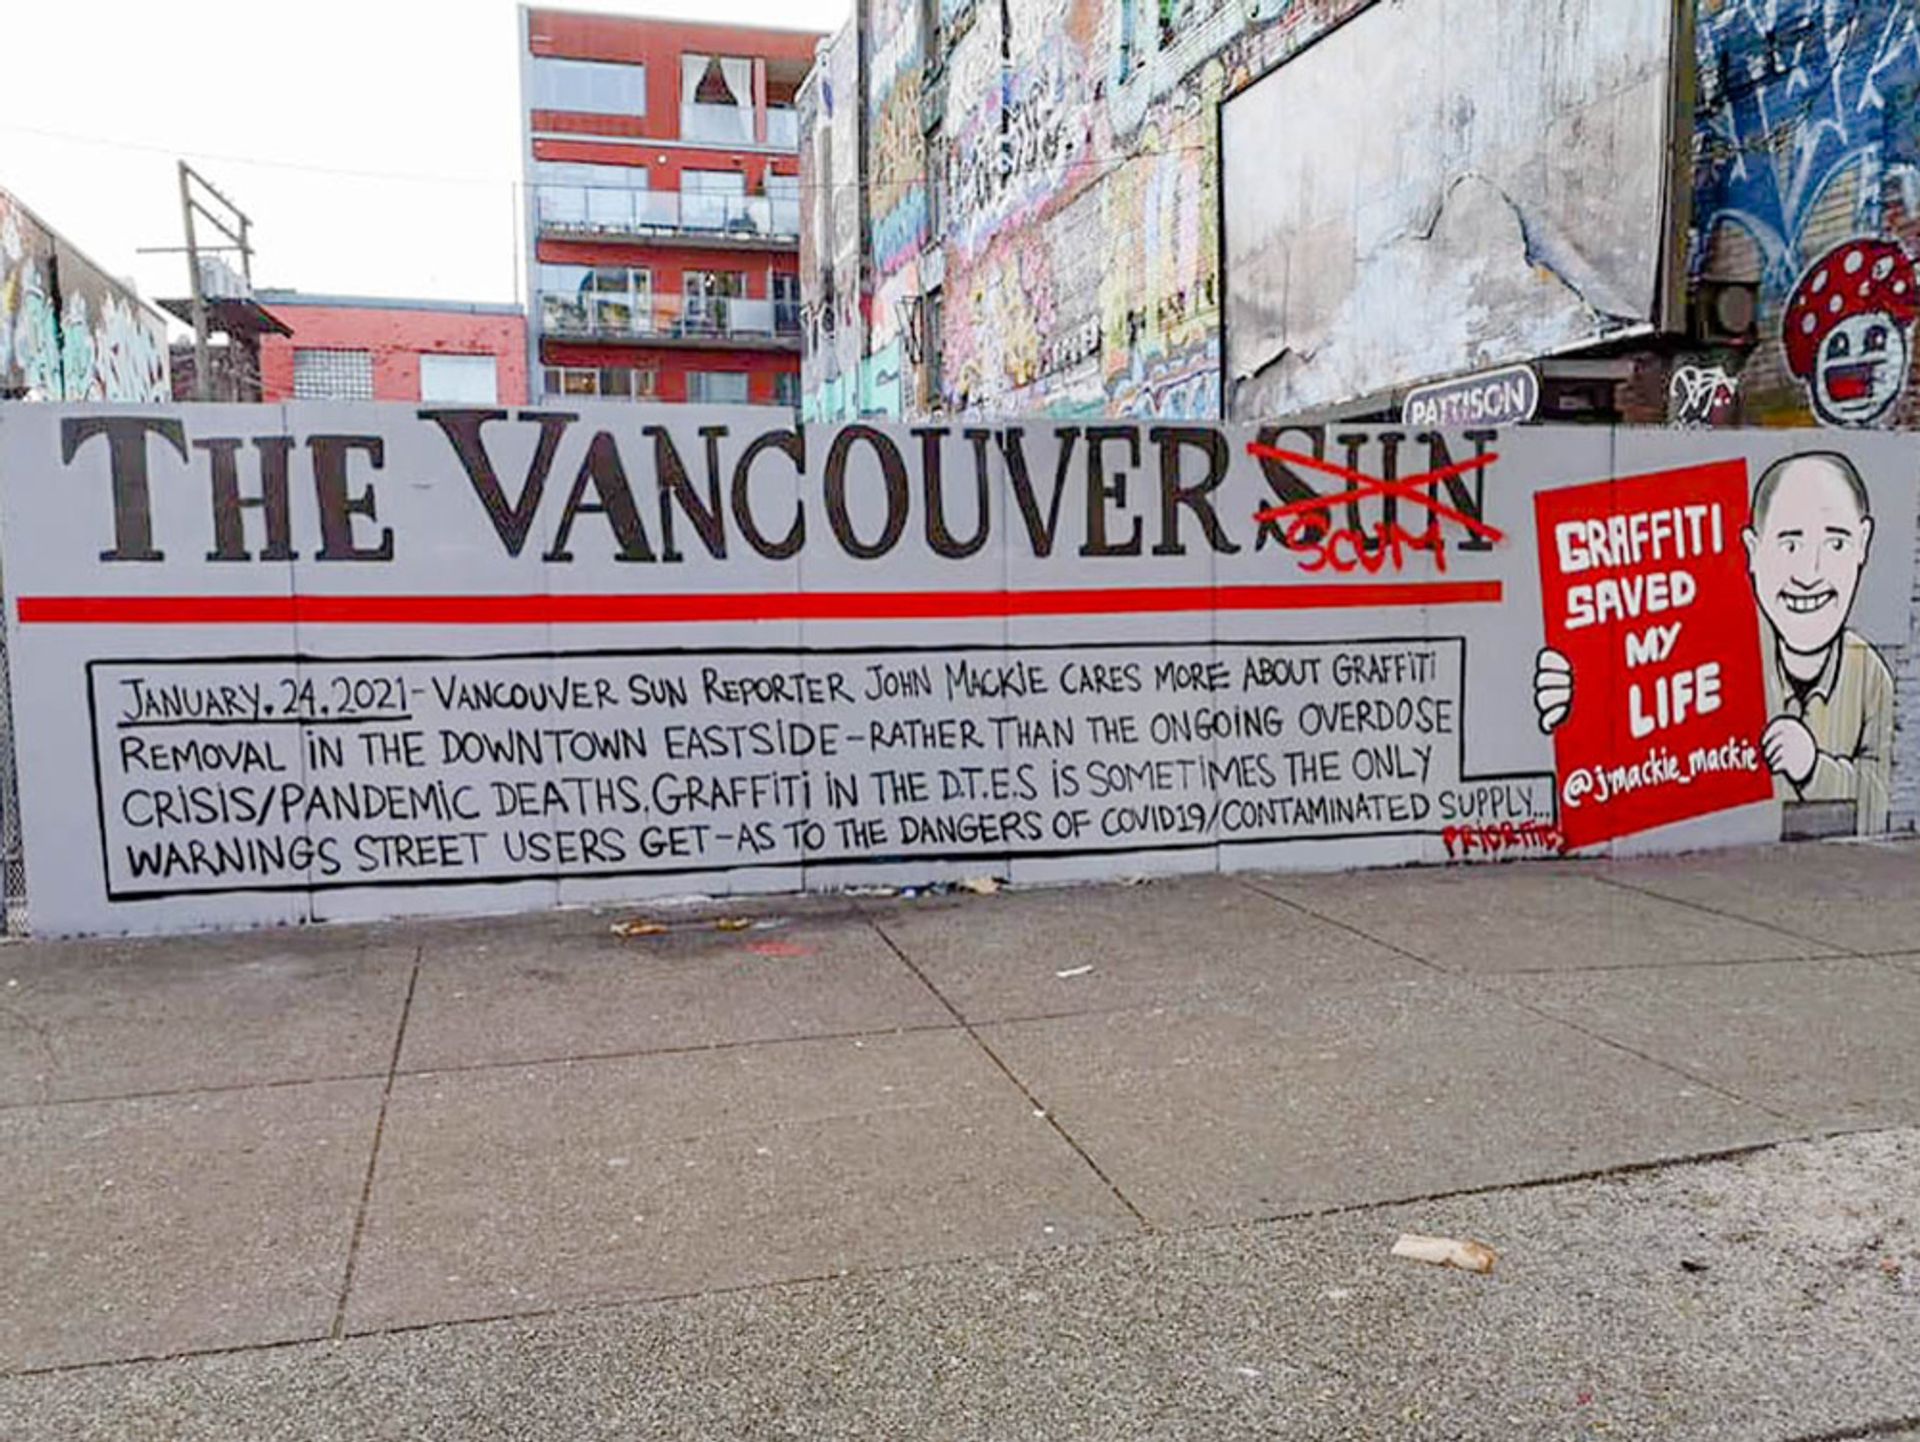 Local street artists responded to an article complaining of graffiti in downtown Vancouver with a unique “letter to the editor” Photo: Trey Helten